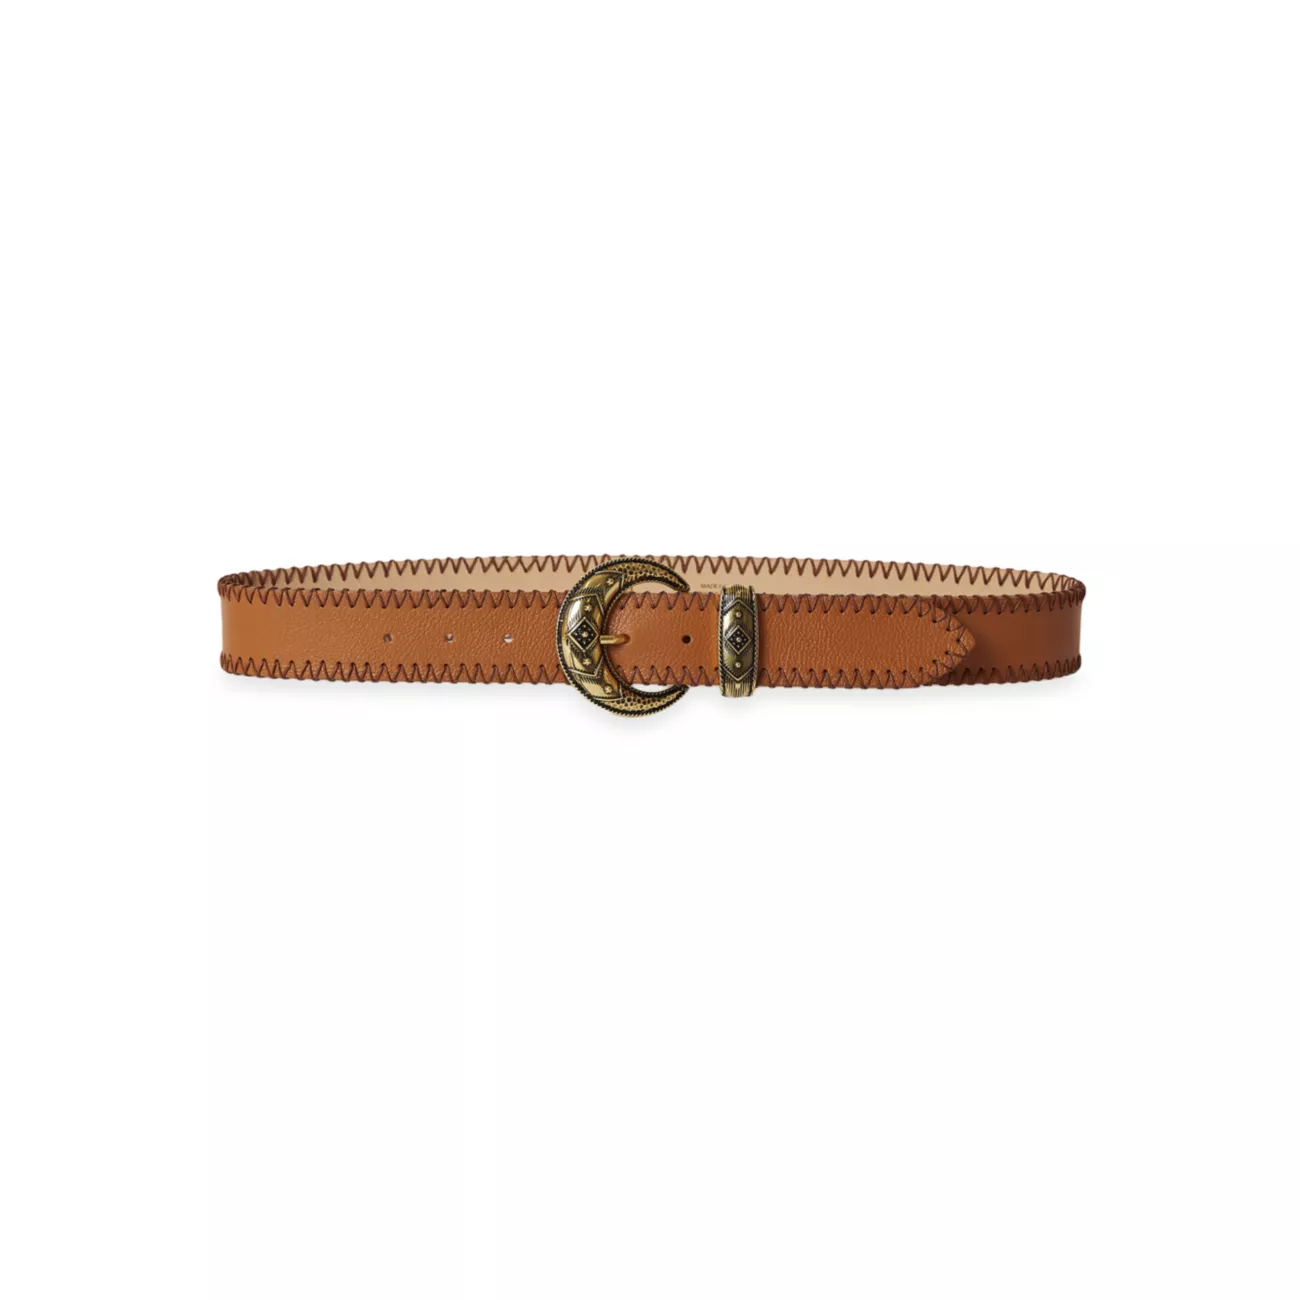 Clover Contrast-Stitched Leather Belt B-Low The Belt